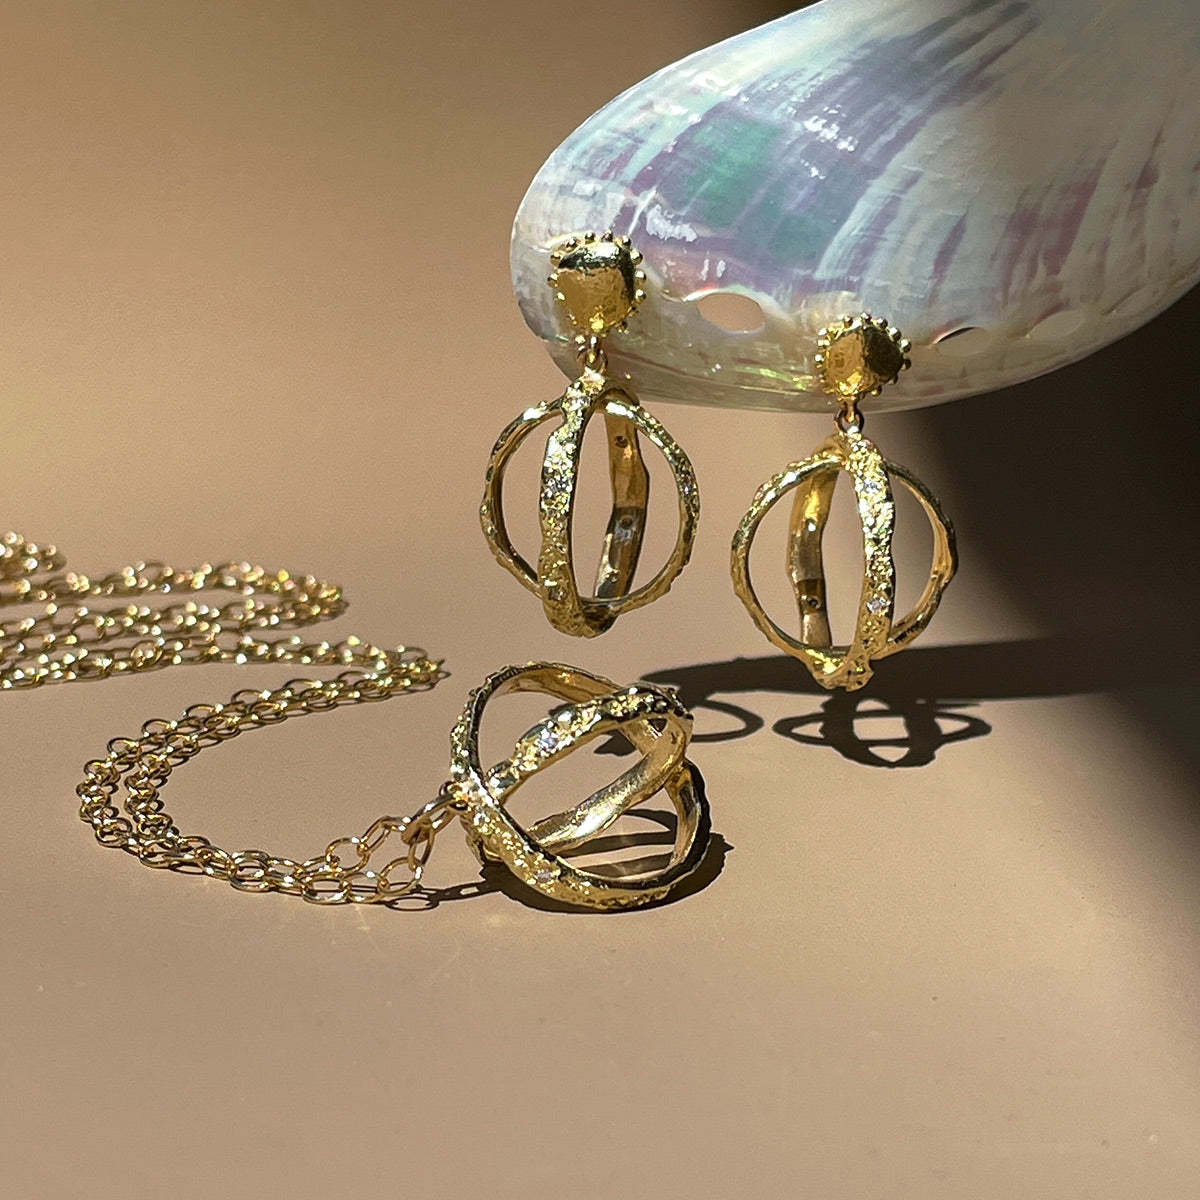 Gold and diamond textured orb necklace and earring set by Jane Bartel Jewelry. Ocean inspired handcrafted fine jewelry.